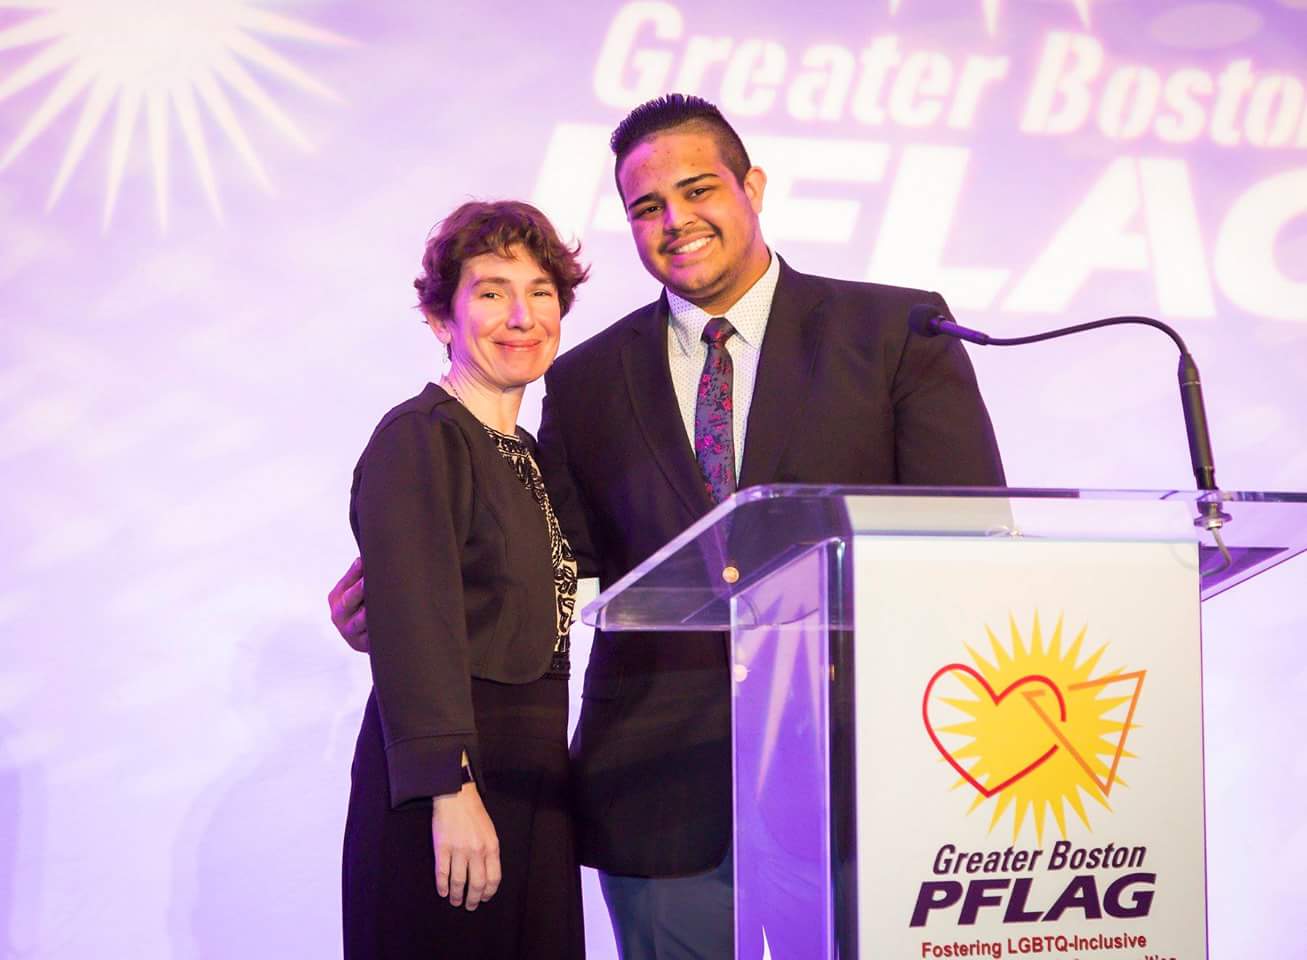 Left to right: Executive Director of Greater Boston PFLAG Valerie Frias and Northeast Metro Tech senior Christian DeJesus Franco at the Greater Boston PFLAG's Pride and Passion dinner. (Courtesy Photo Northeast Metro Tech)